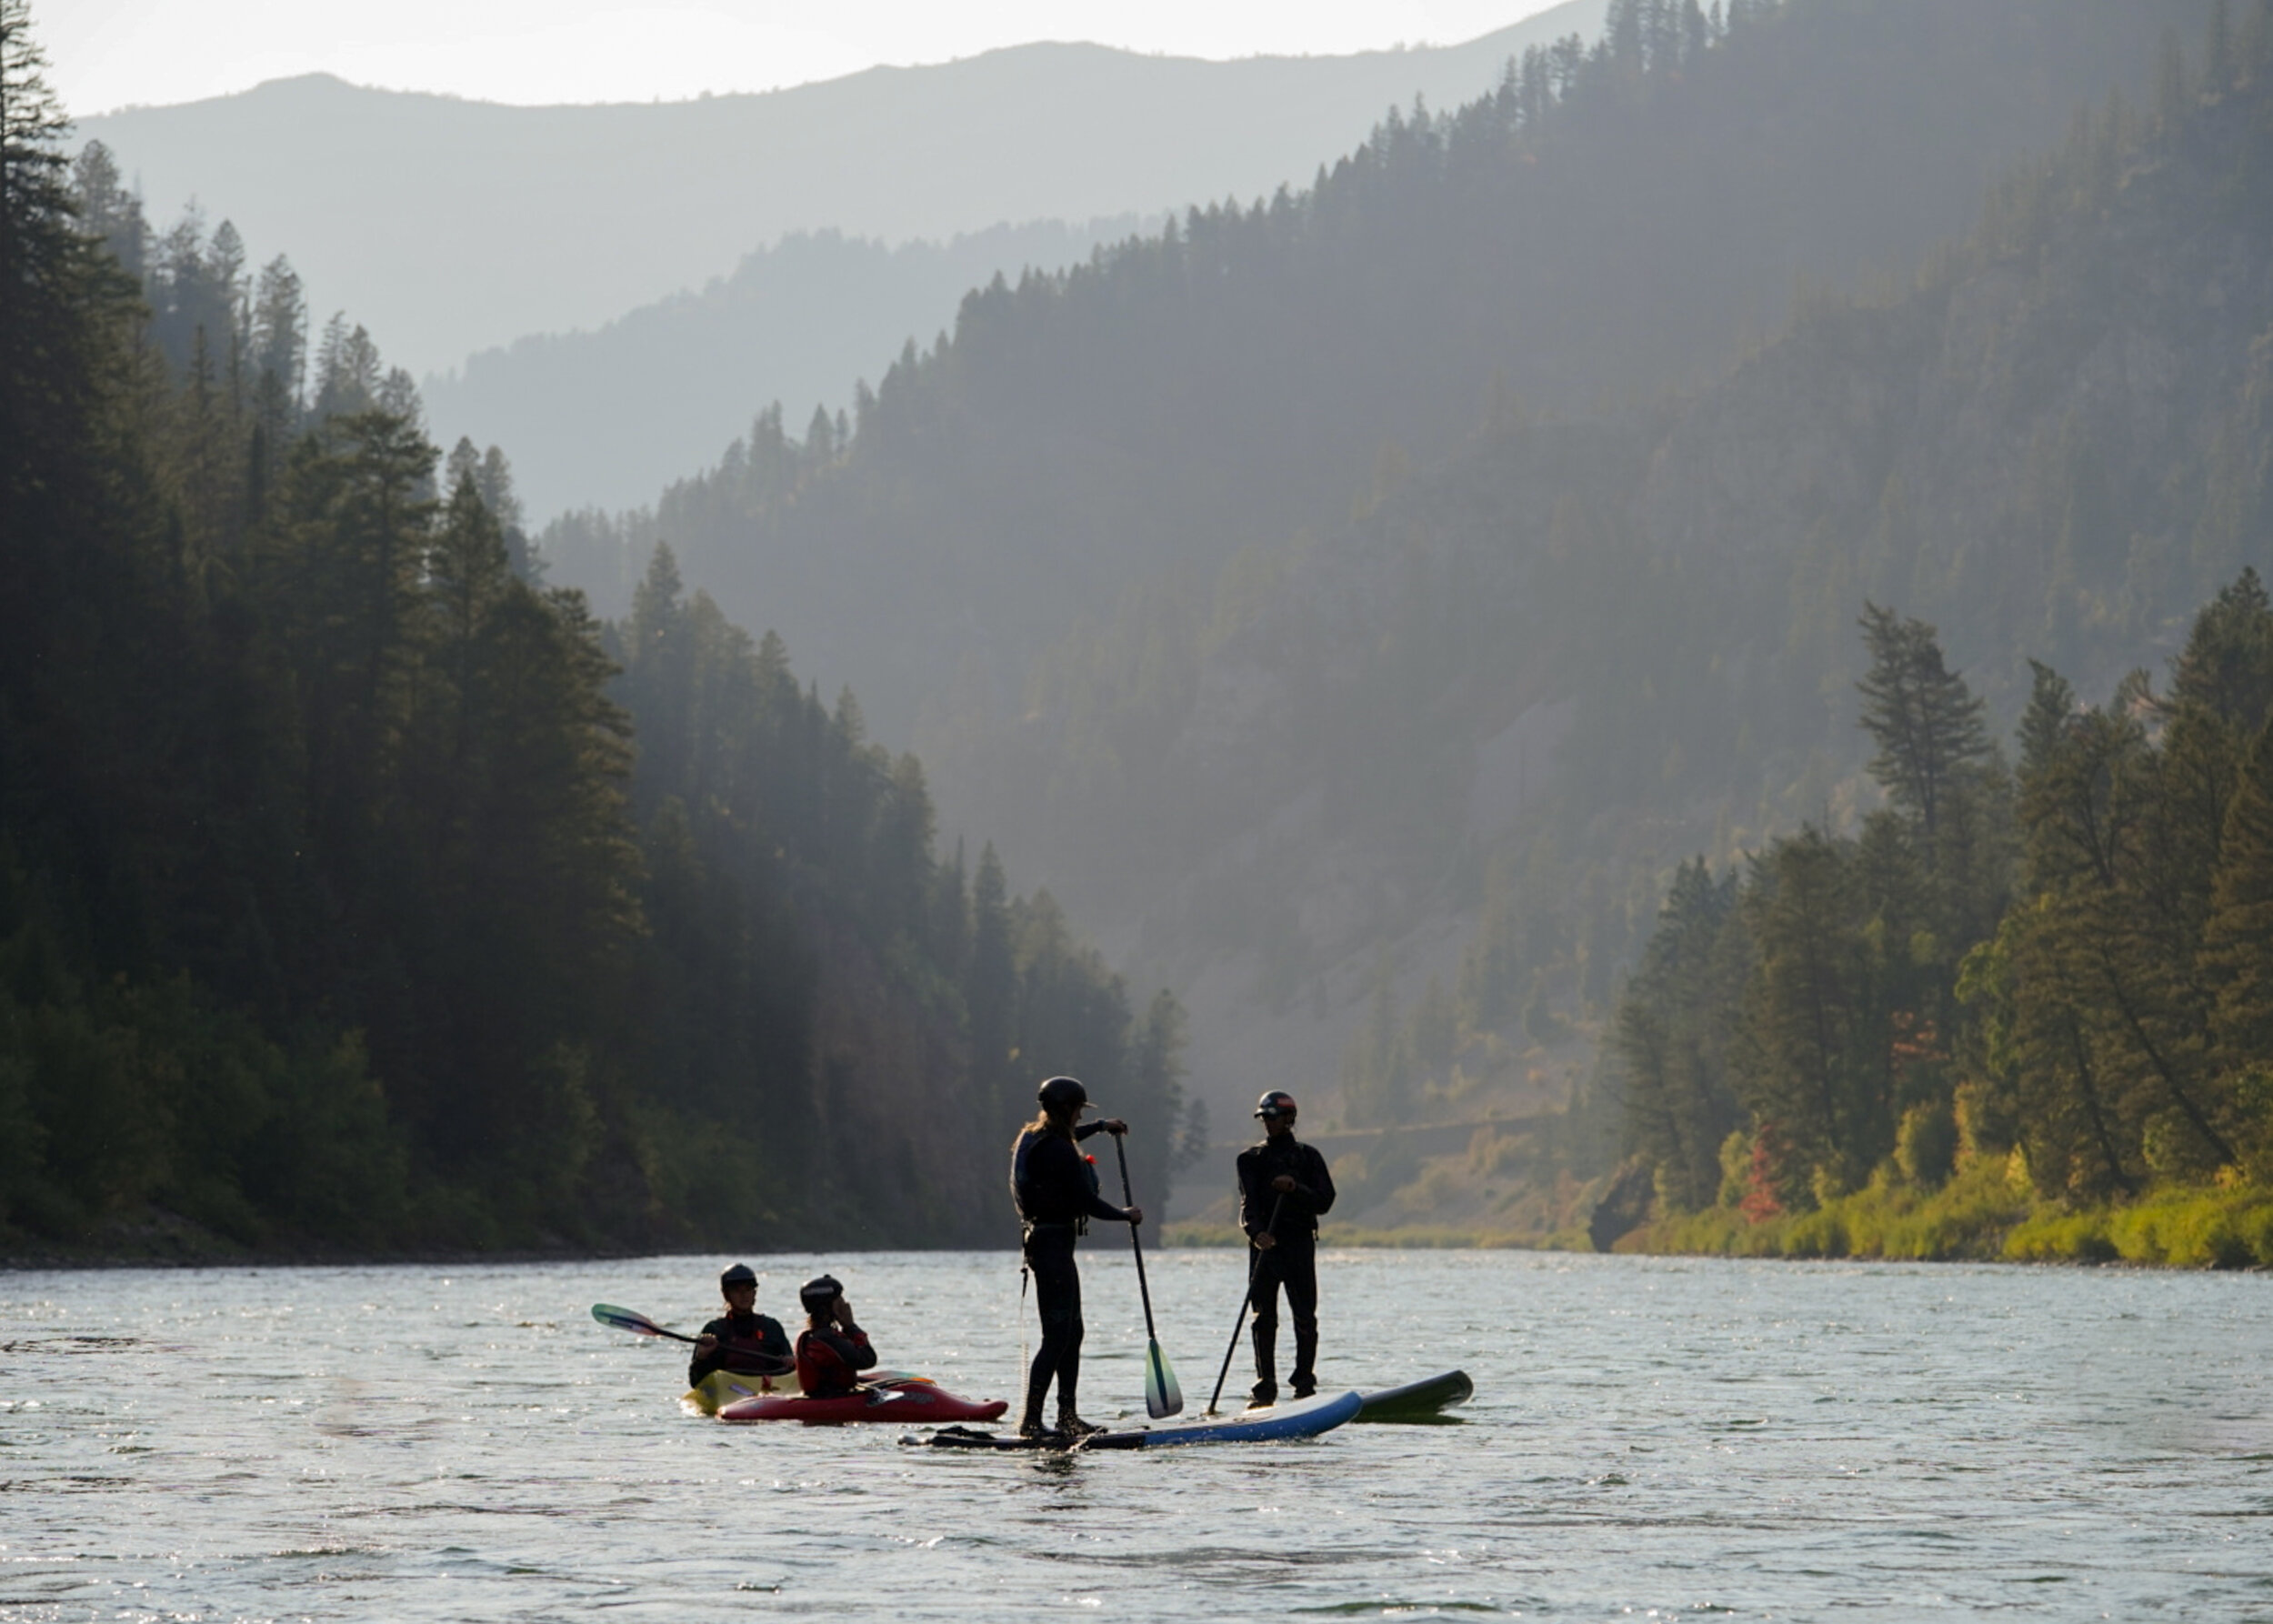  Images of whitewater kayakers on the Snake River near Hoback, WY, on Thur. Sept. 9, 2021. 